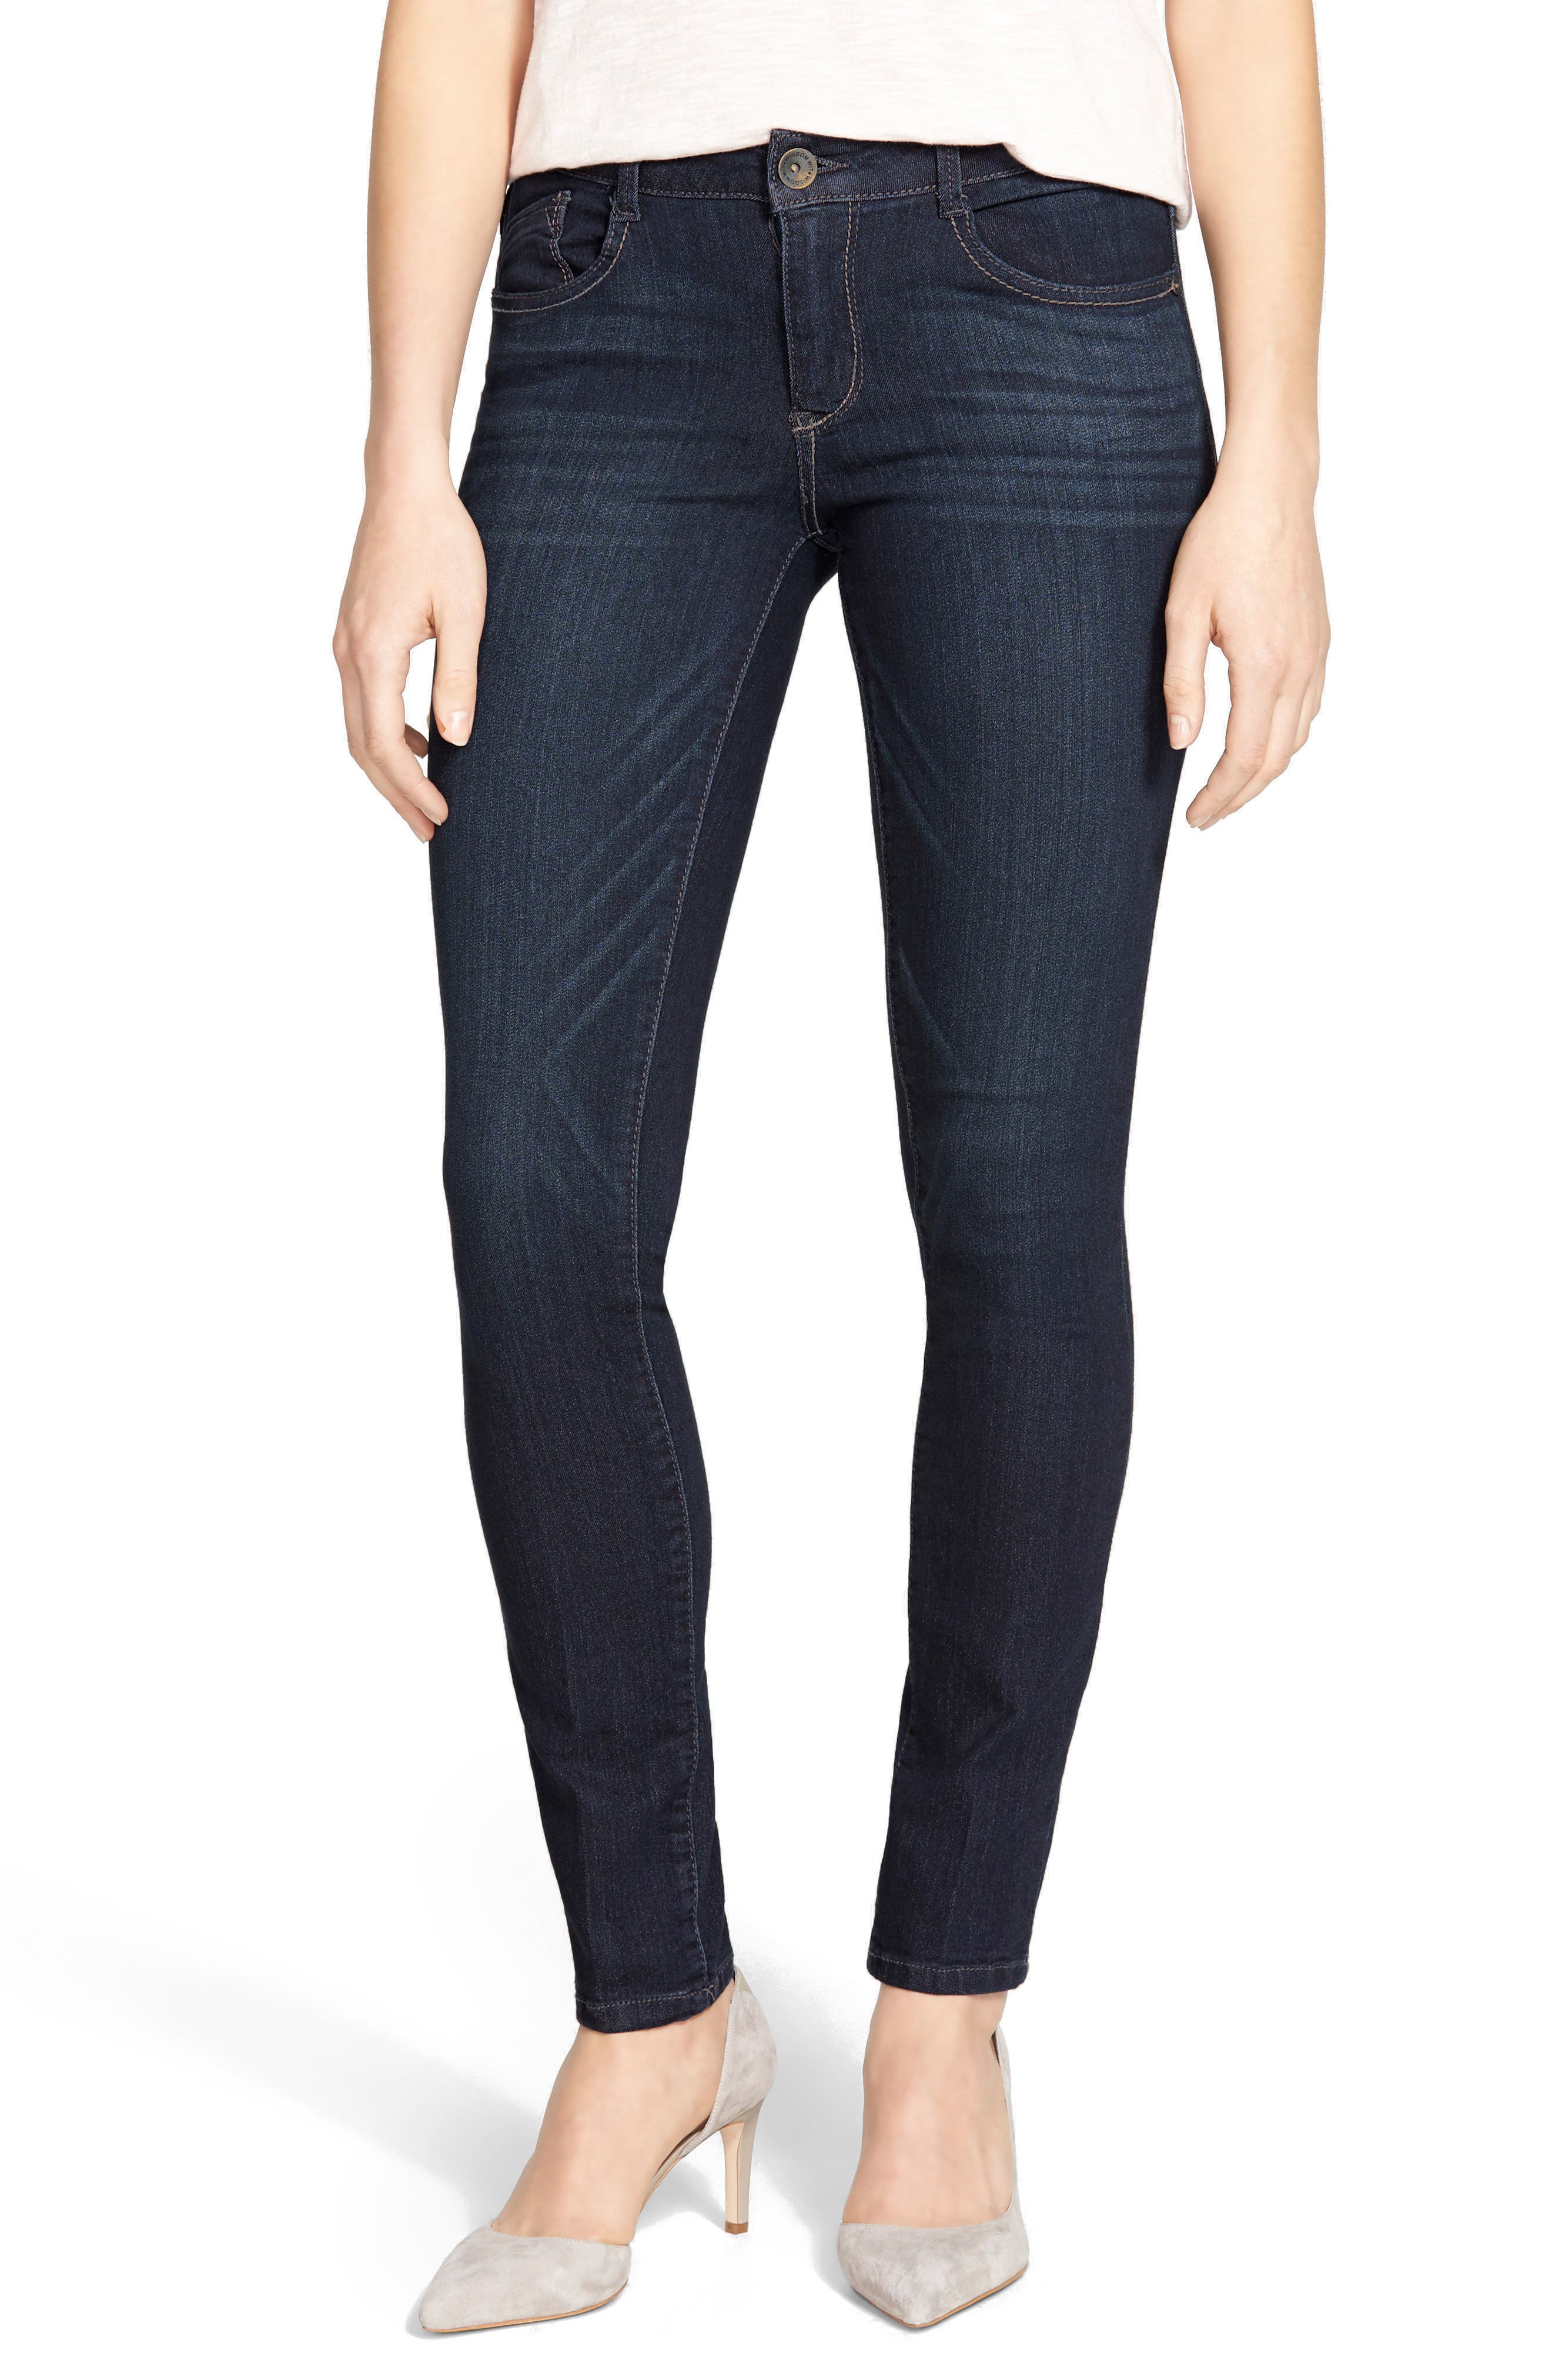 h and m petite jeans